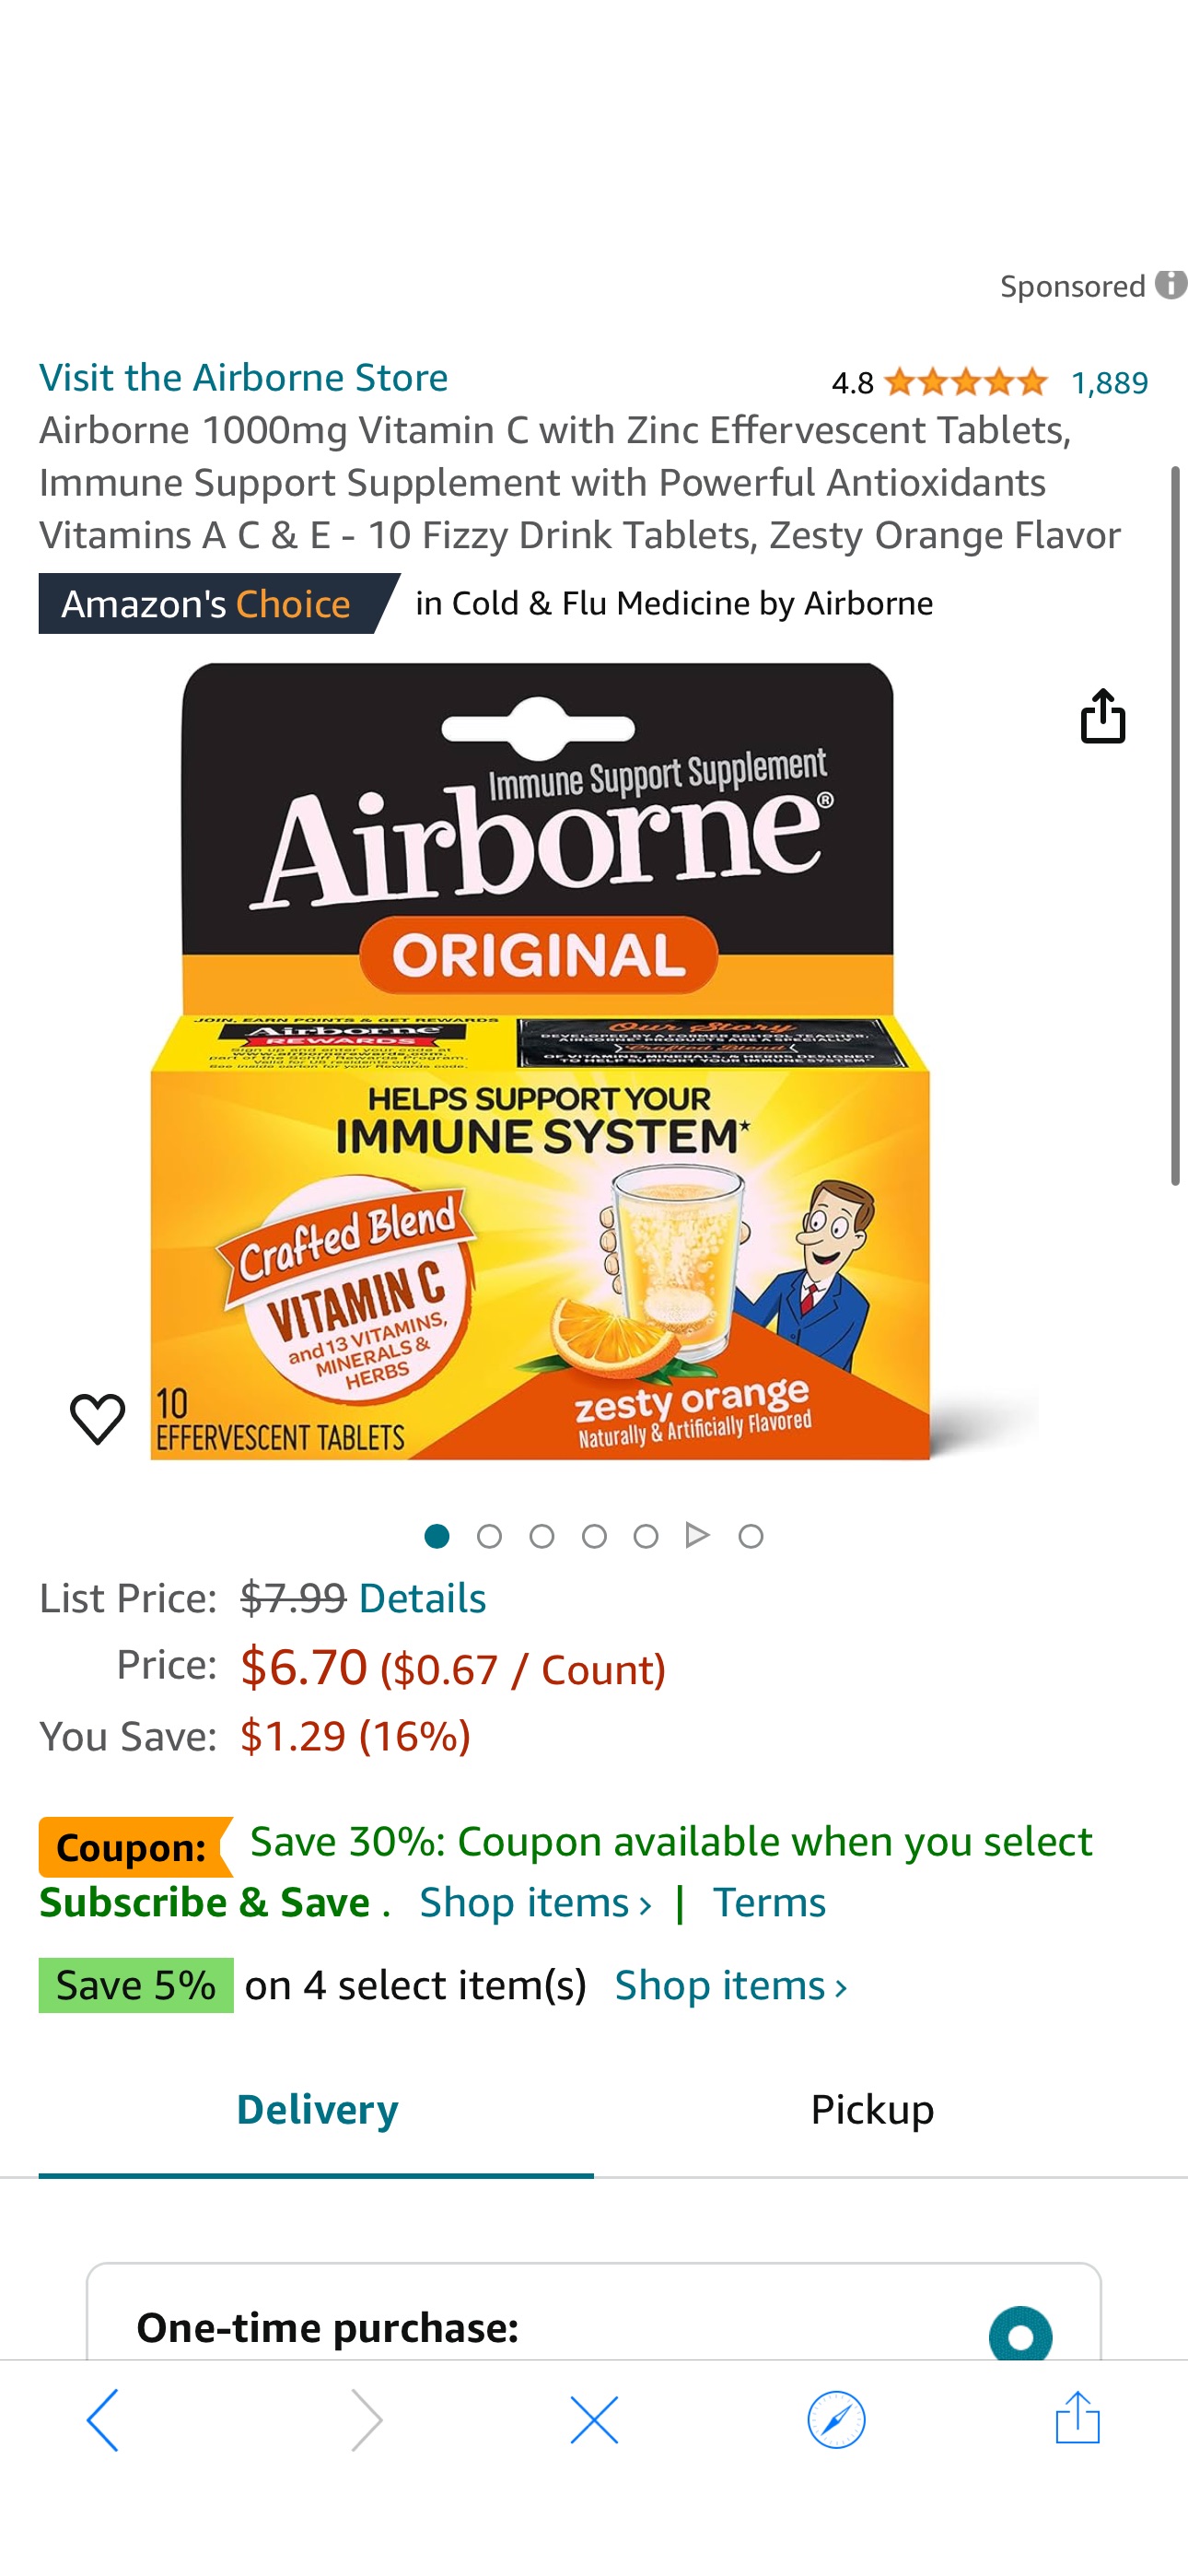 Amazon.com: Airborne 1000mg Vitamin C with Zinc Effervescent Tablets, Immune Support Supplement with Powerful Antioxidants Vitamins A C & E - 10 Fizzy Drink Tablets, Zesty Orange Flavor : Health & Hou